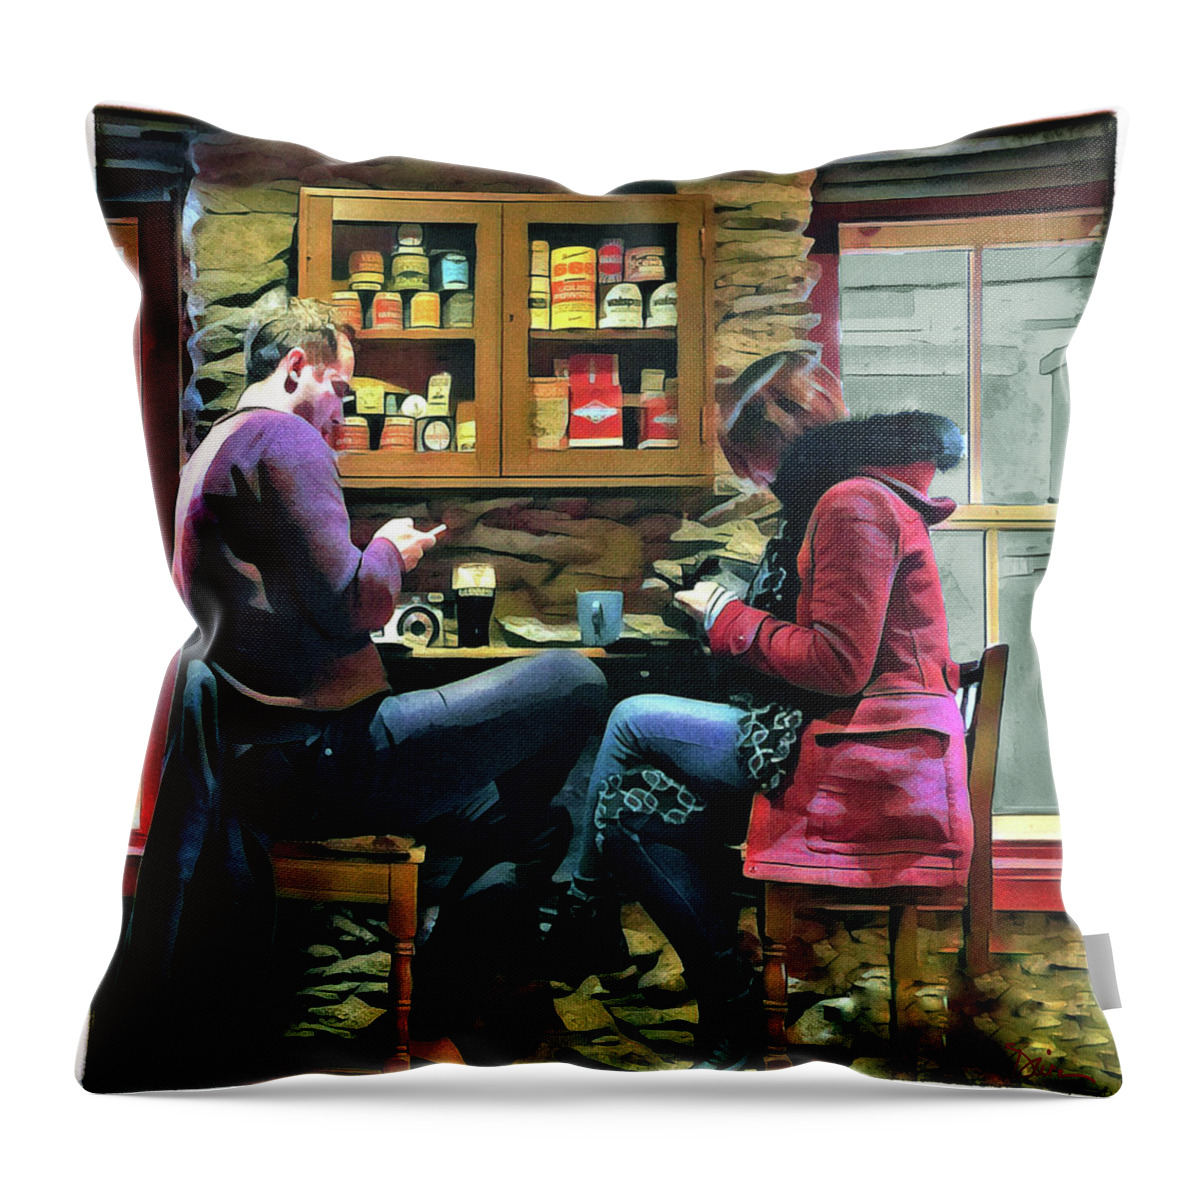 Pub Throw Pillow featuring the photograph Social Distancing In Ireland by Peggy Dietz